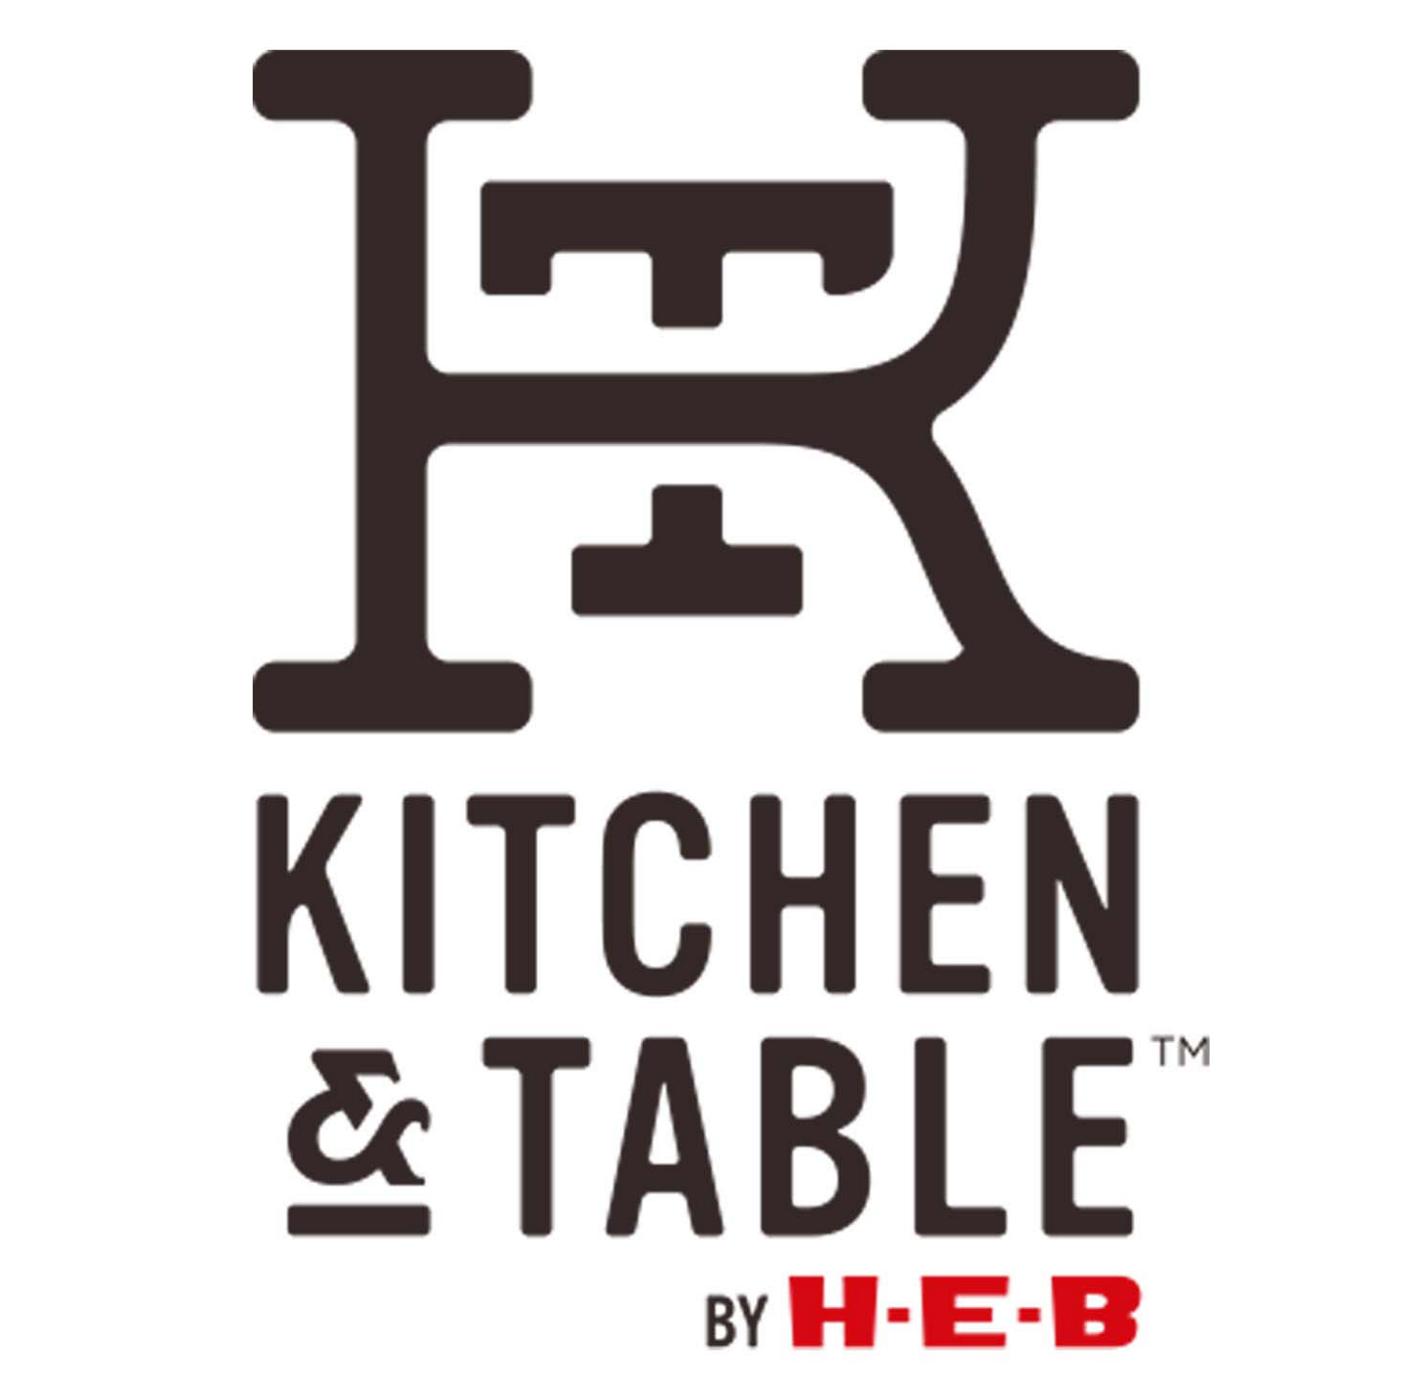 Kitchen & Table by H-E-B Tempered Borosilicate Measuring Cup - Shop Baking  Tools at H-E-B